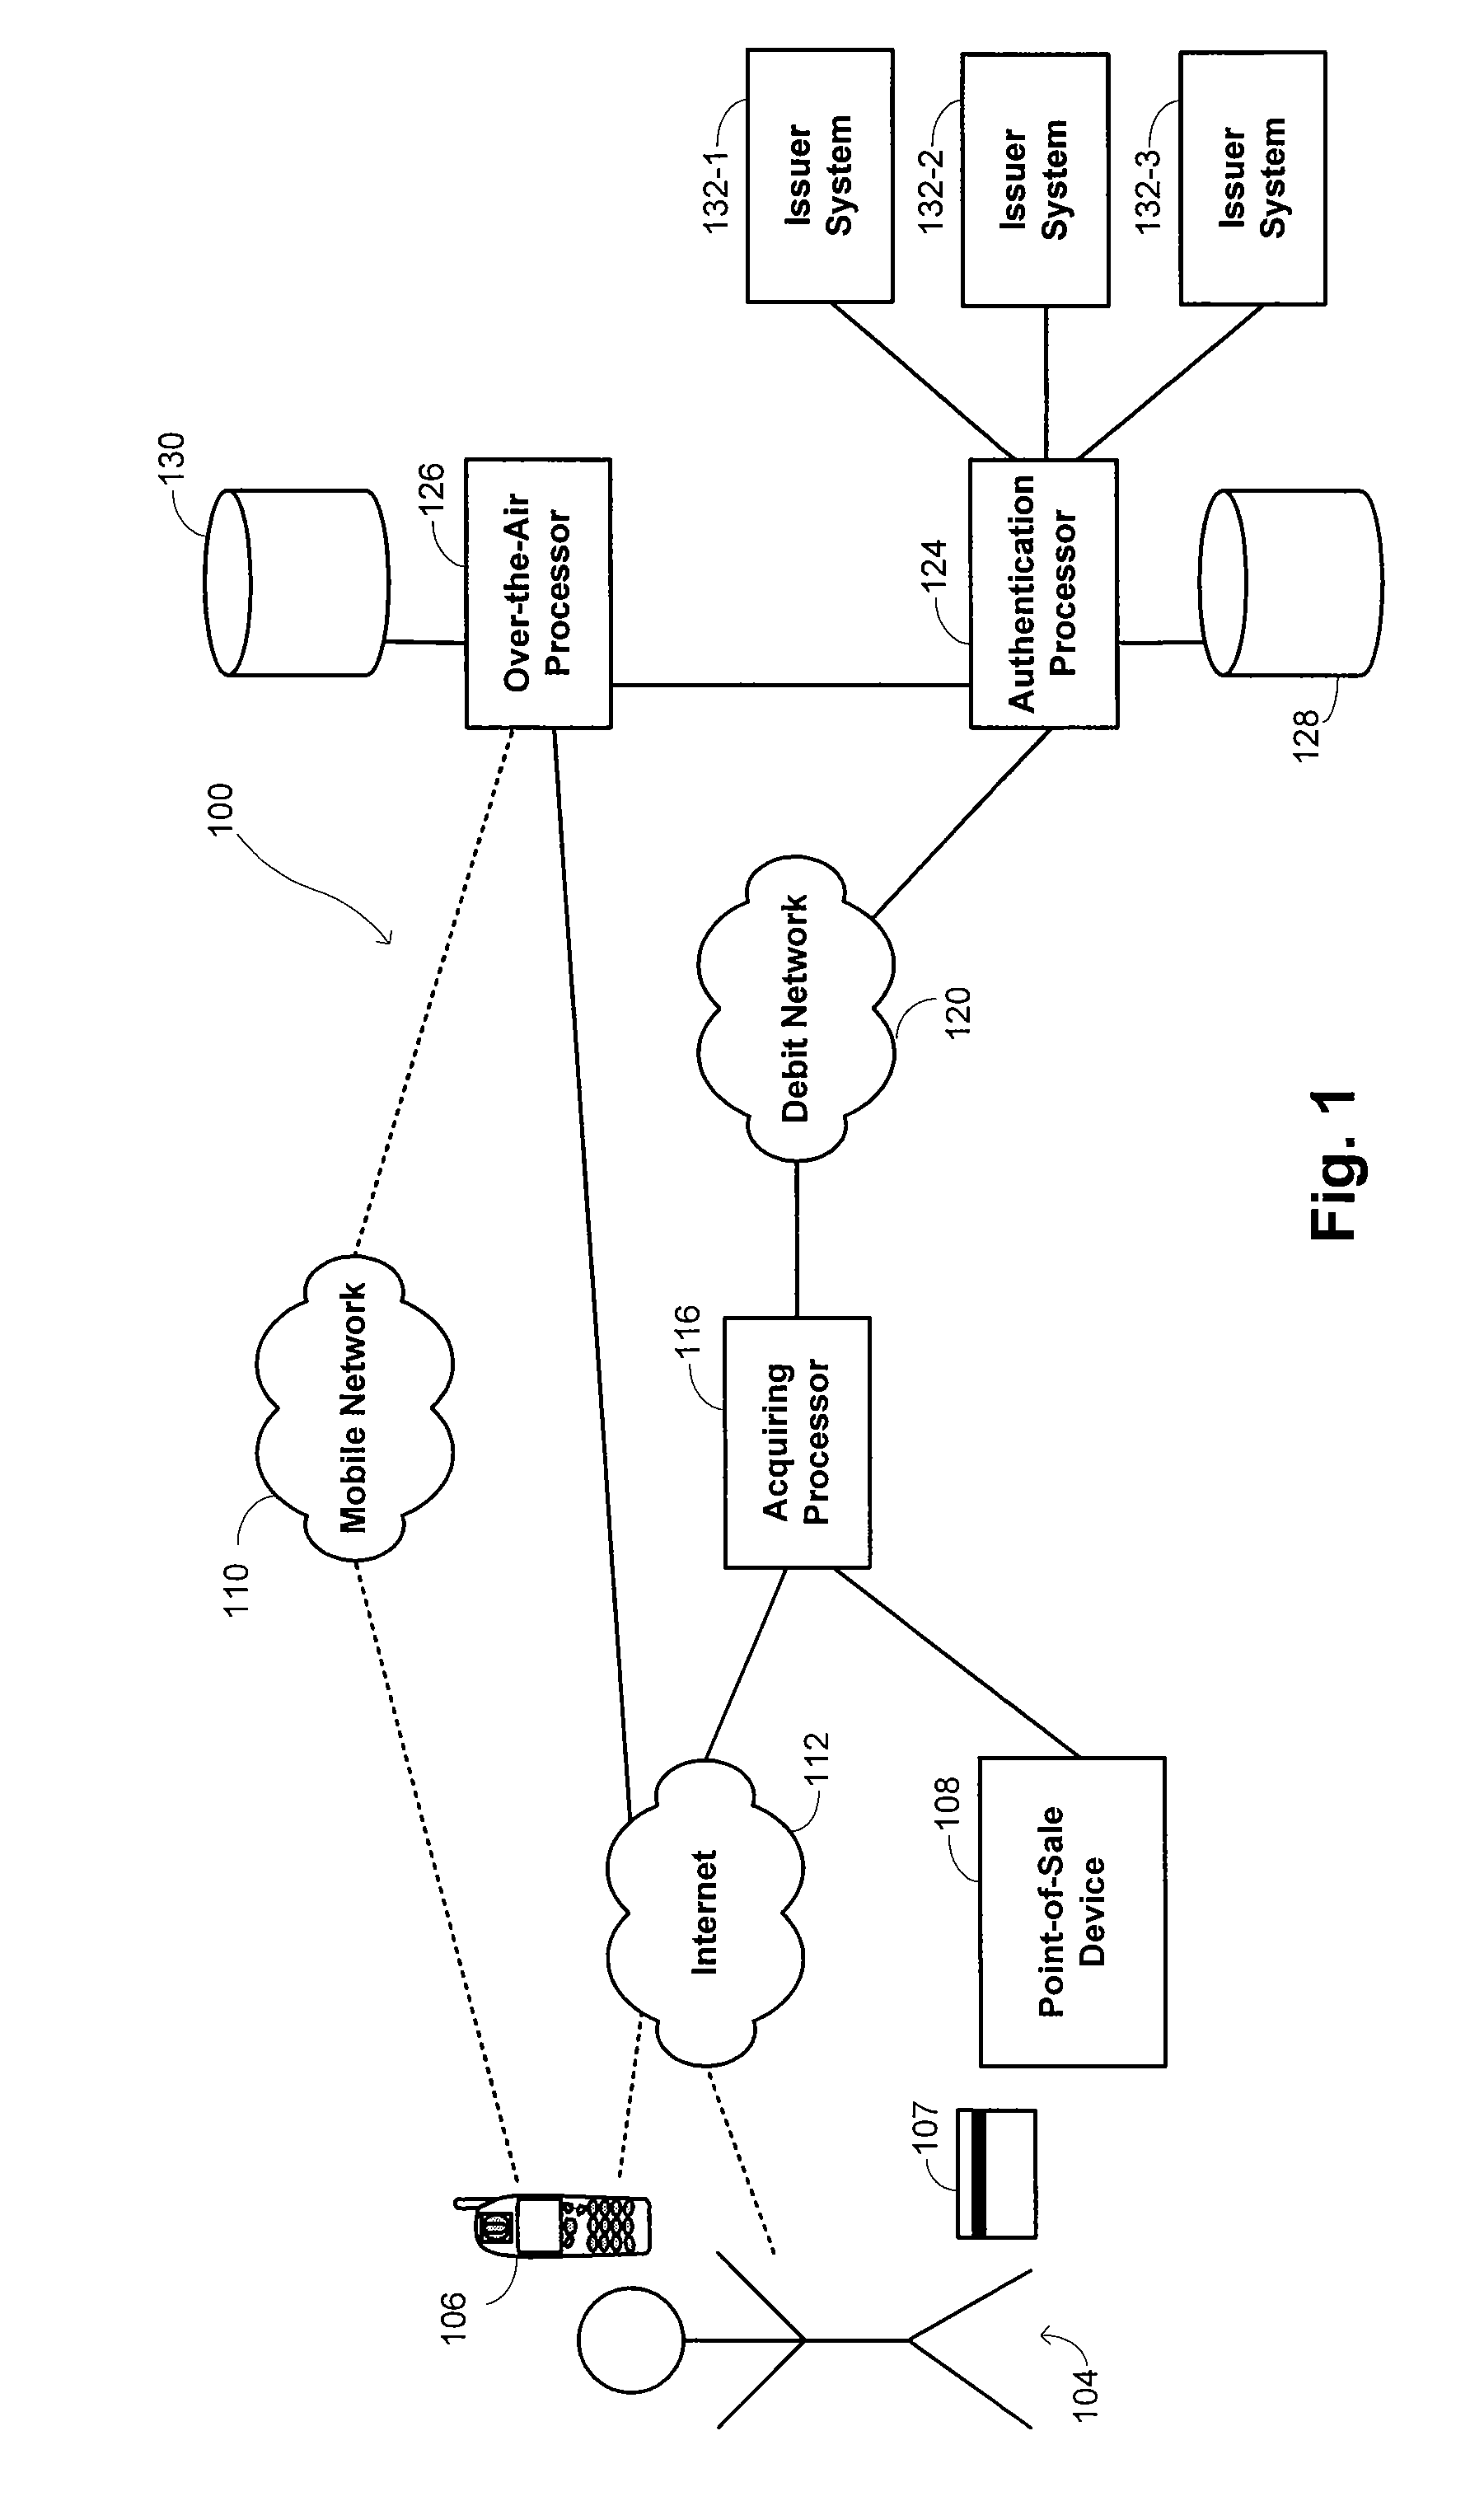 Processing of financial transactions using debit networks